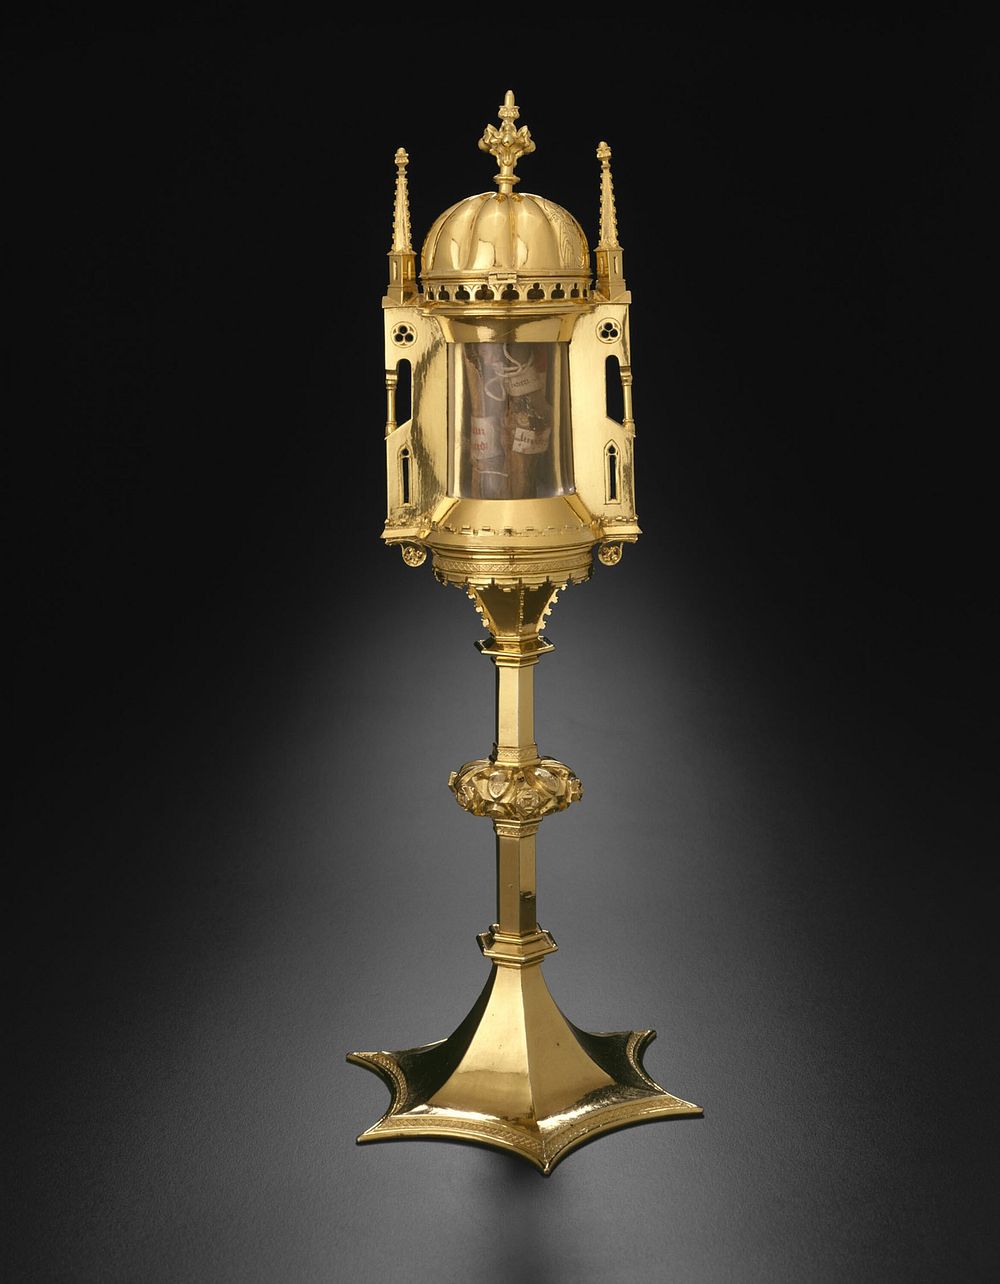 Circular Reliquary with Domed Roof and Relics of Saints Godehard and Bernward